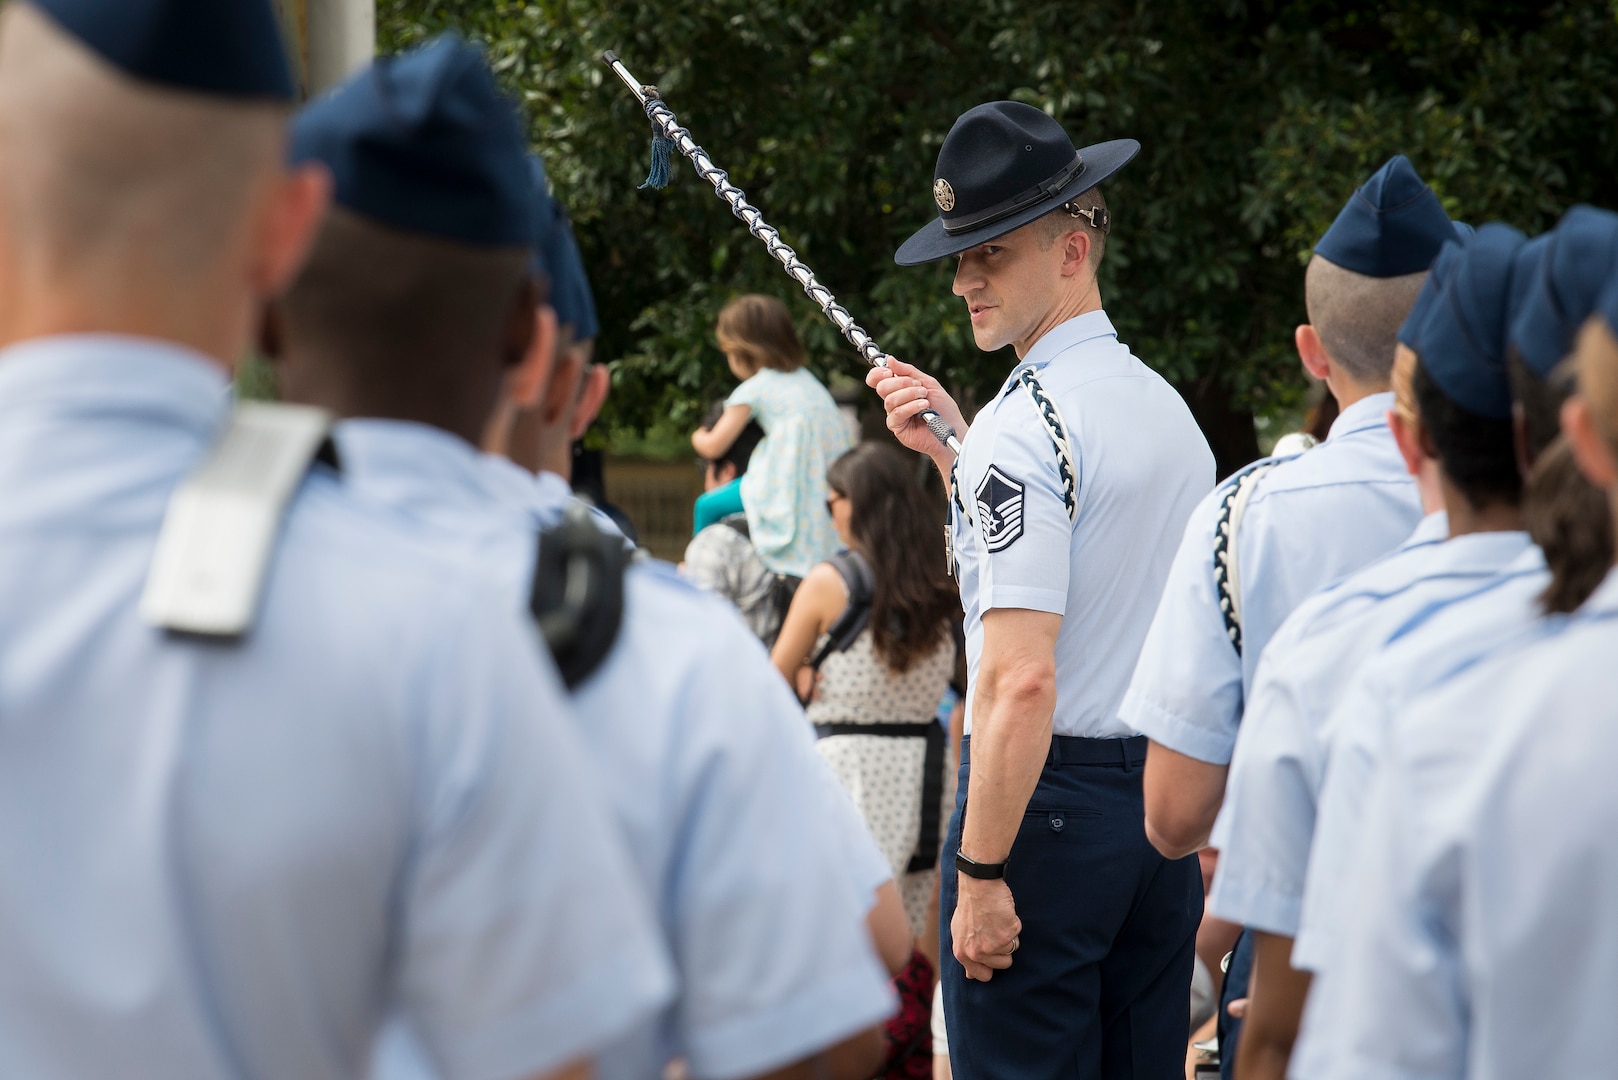 Master Sgt. Douglas Kost, 321st Training Squadron military training instructor, marches the Joint Base San Antonio-Lackland Drum and Bugle Corps after performing during San Antonio’s Fiesta Air Force Day at the Alamo, April 22, 2019. From its beginning in 1891, Fiesta has grown into an annual celebration that includes civic and military observances, street and river parades, exhibits, pilgrimages and memorials.